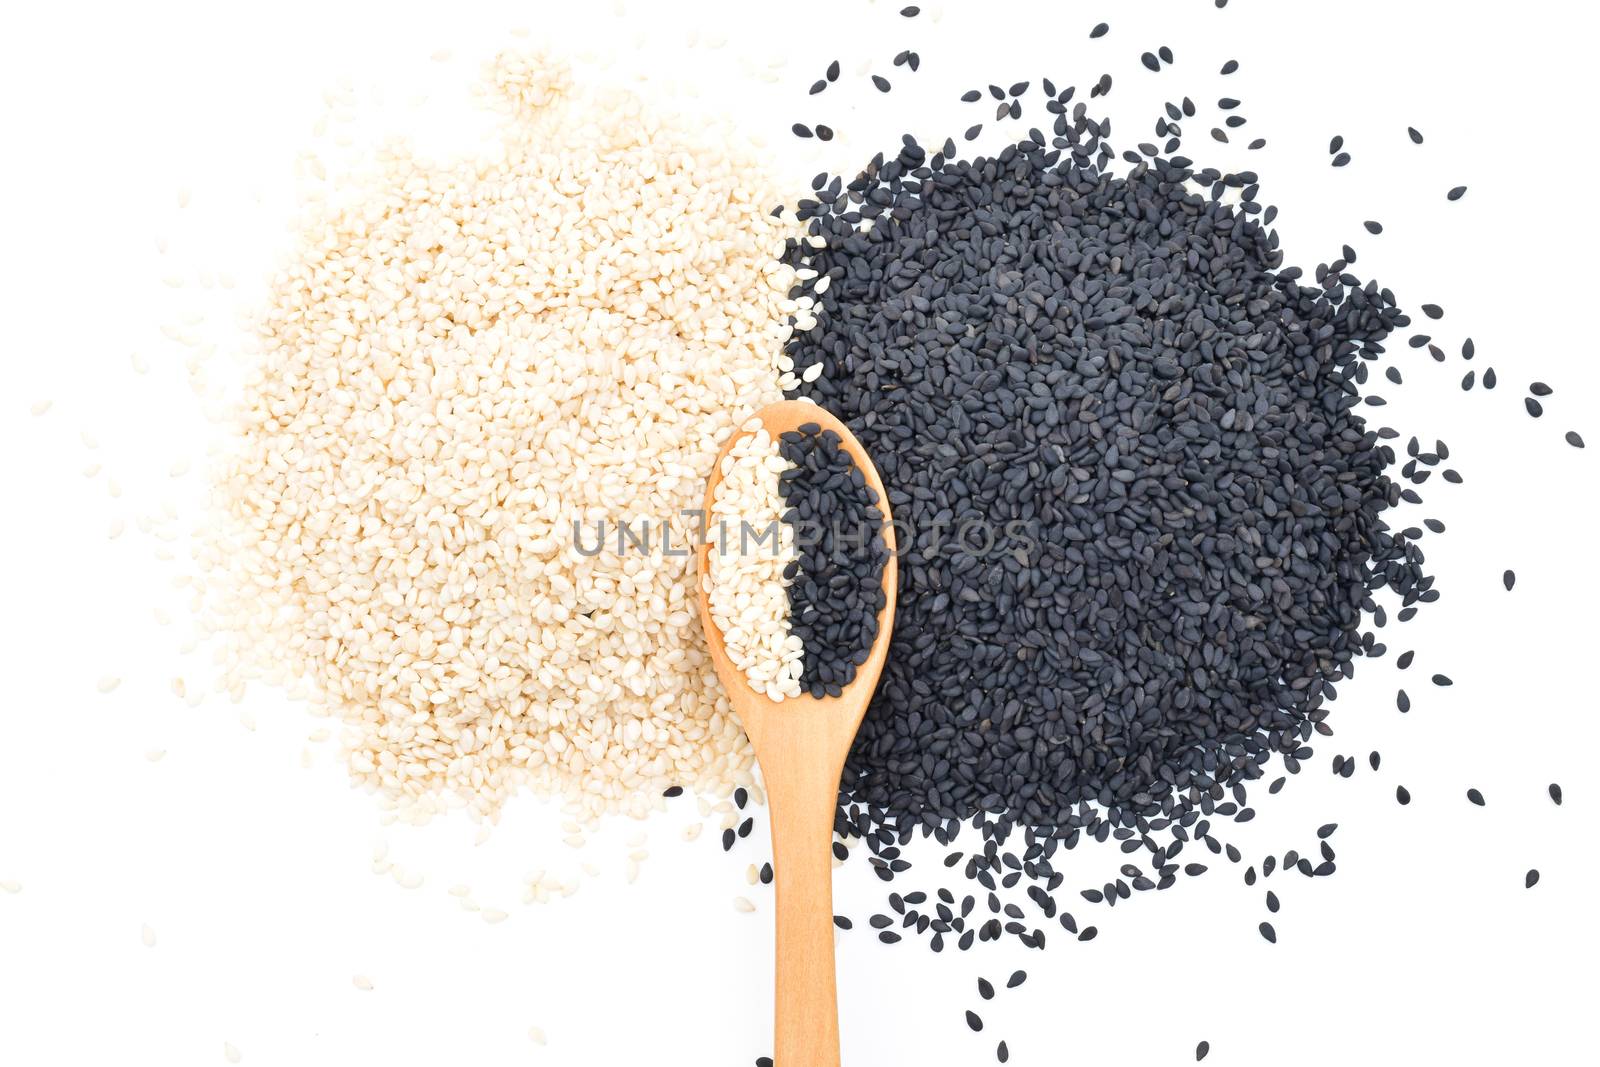 White and Black sesame seeds in wooden scoop on white background